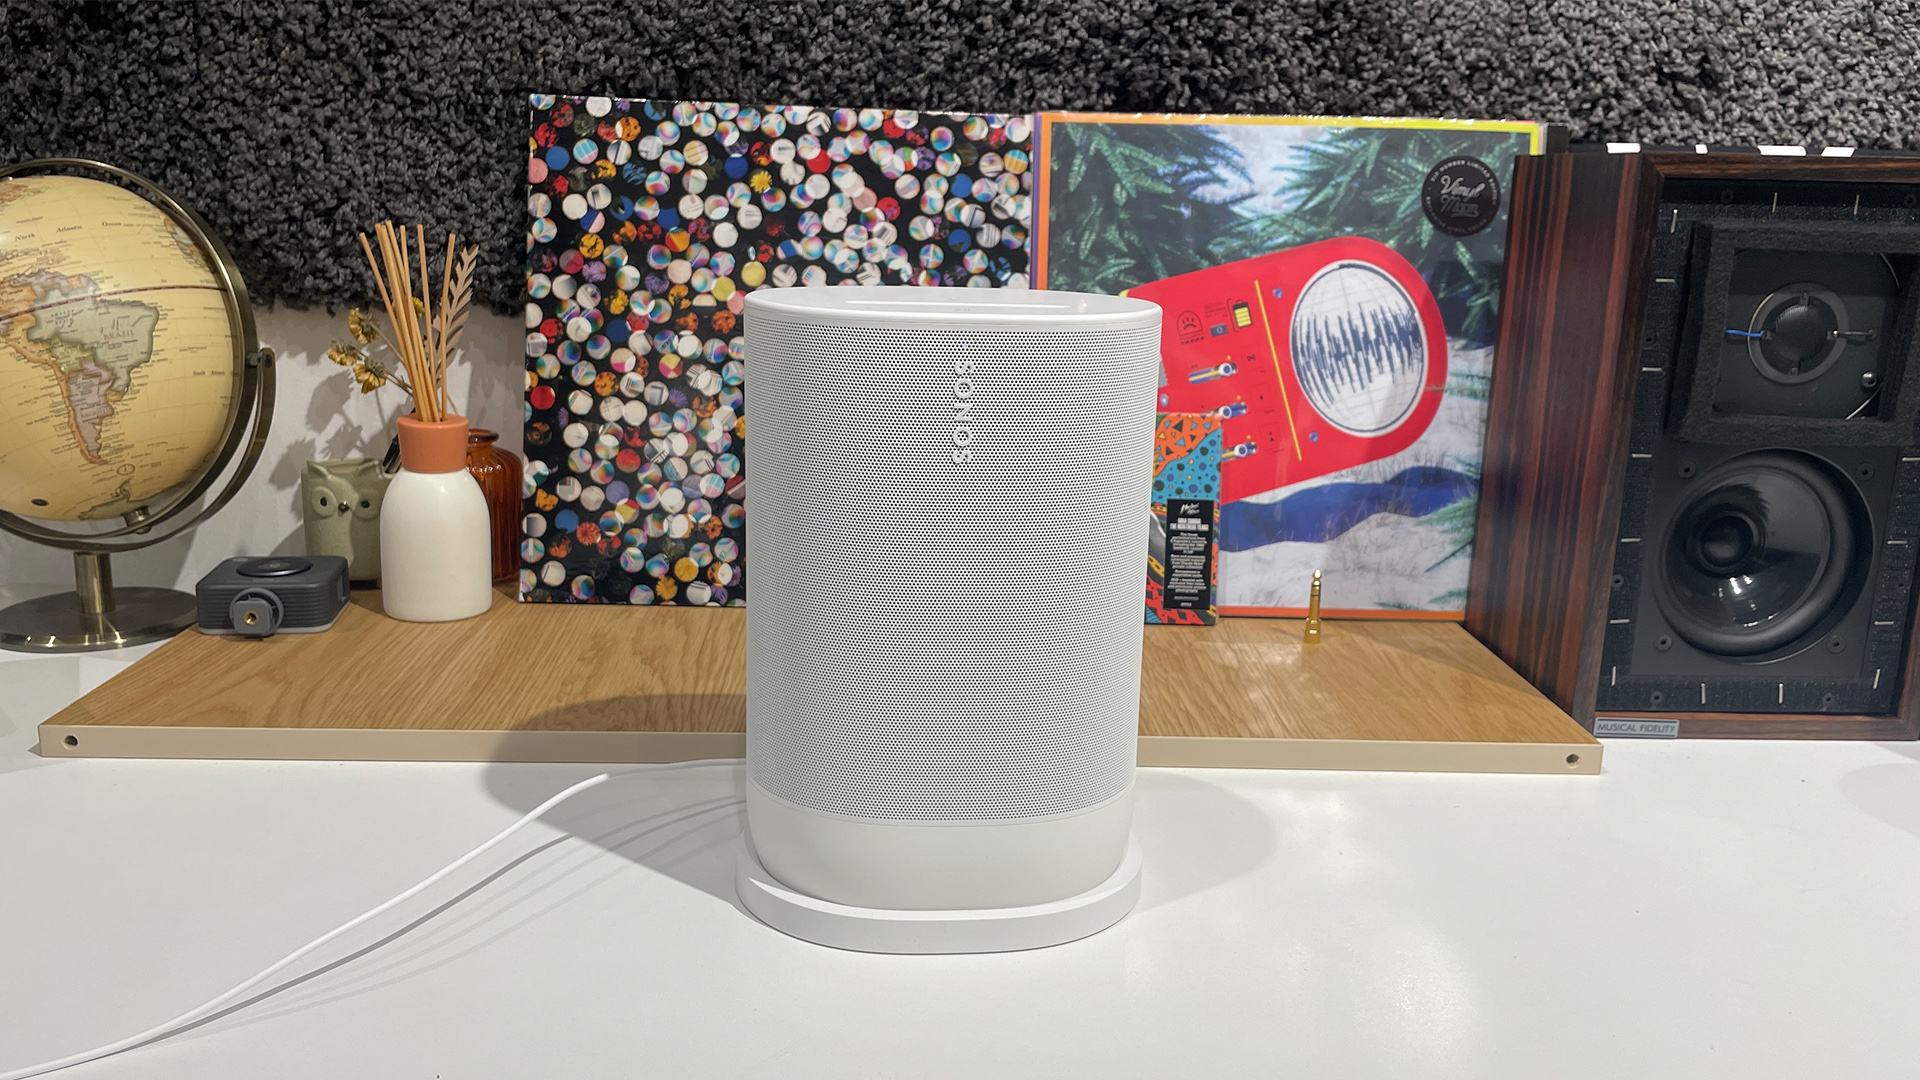 Measured: The Sonos Move shows a Bluetooth speaker can sound great